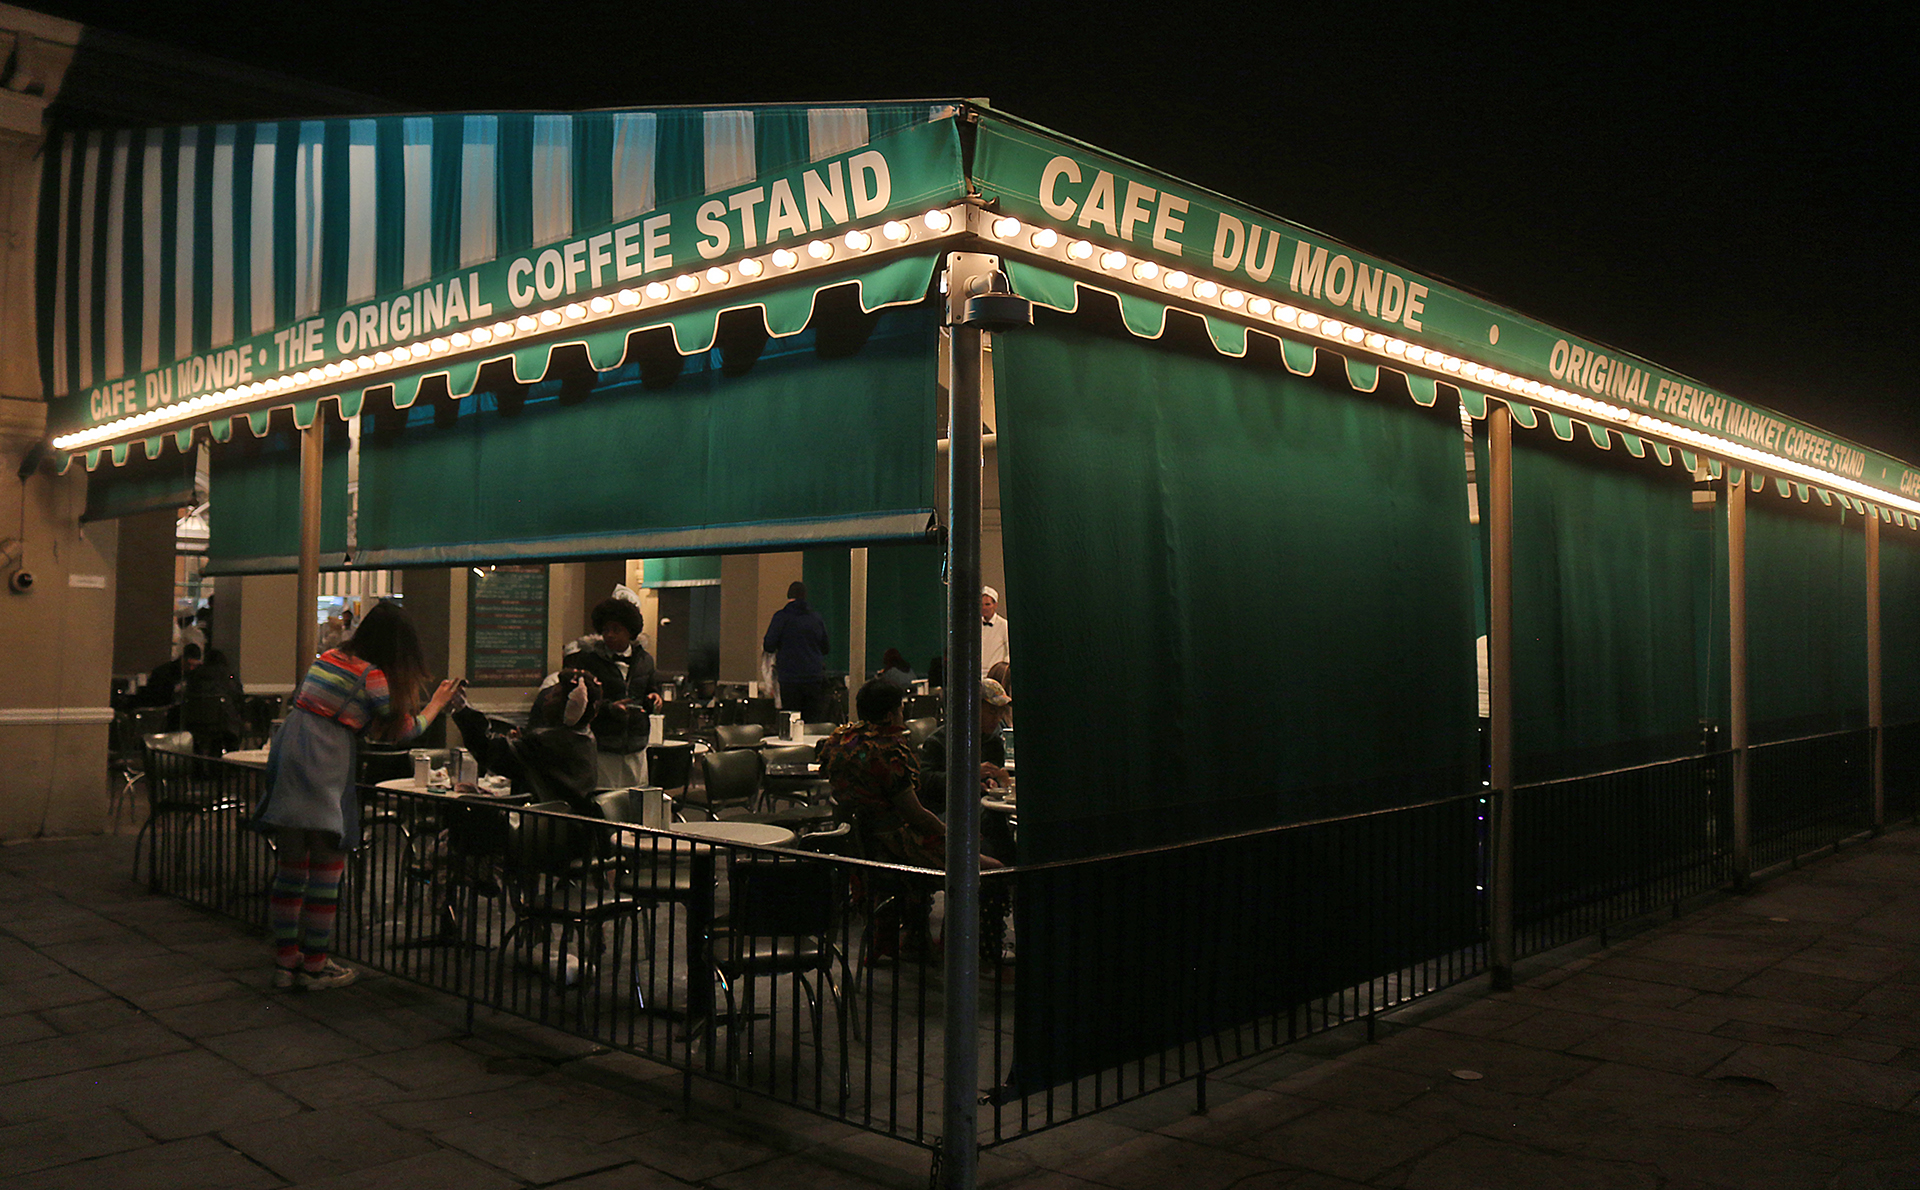 a green awning with white text on it